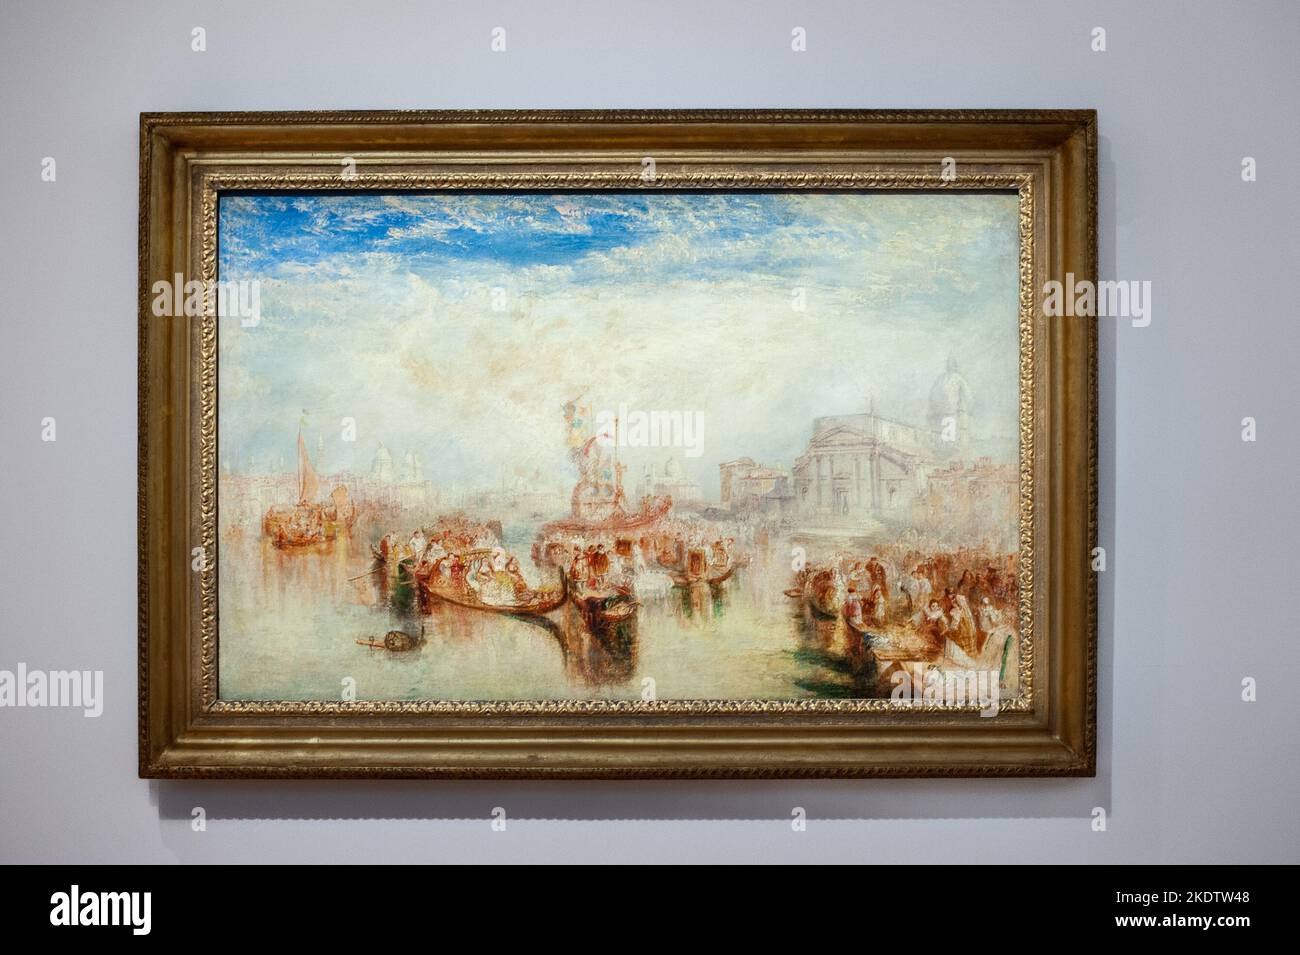 Joseph Mallord William Turner, R.A. (1775-1851) Depositing of John Bellini's Three Pictures in La Chiesa Redentore, Venice oil on canvas 29 x 45½ in. (73.7 x 115.6 cm.) Painted in 1841 Estimate: $28,000,000-35,000,000 hanging on the wall at Visionary: The Paul G. Allen Collection presented at Christie's New York Galleries in Rockefeller Center in New York, NY on Nov. 8, 2022. The auction is set to take place Nov 9-10, 2022 and it has been valued in excess of $1 billion. The collection of philanthropist Paul G. Allen, co-founder of Microsoft, includes more than 150 masterpieces spanning 500 y Stock Photo